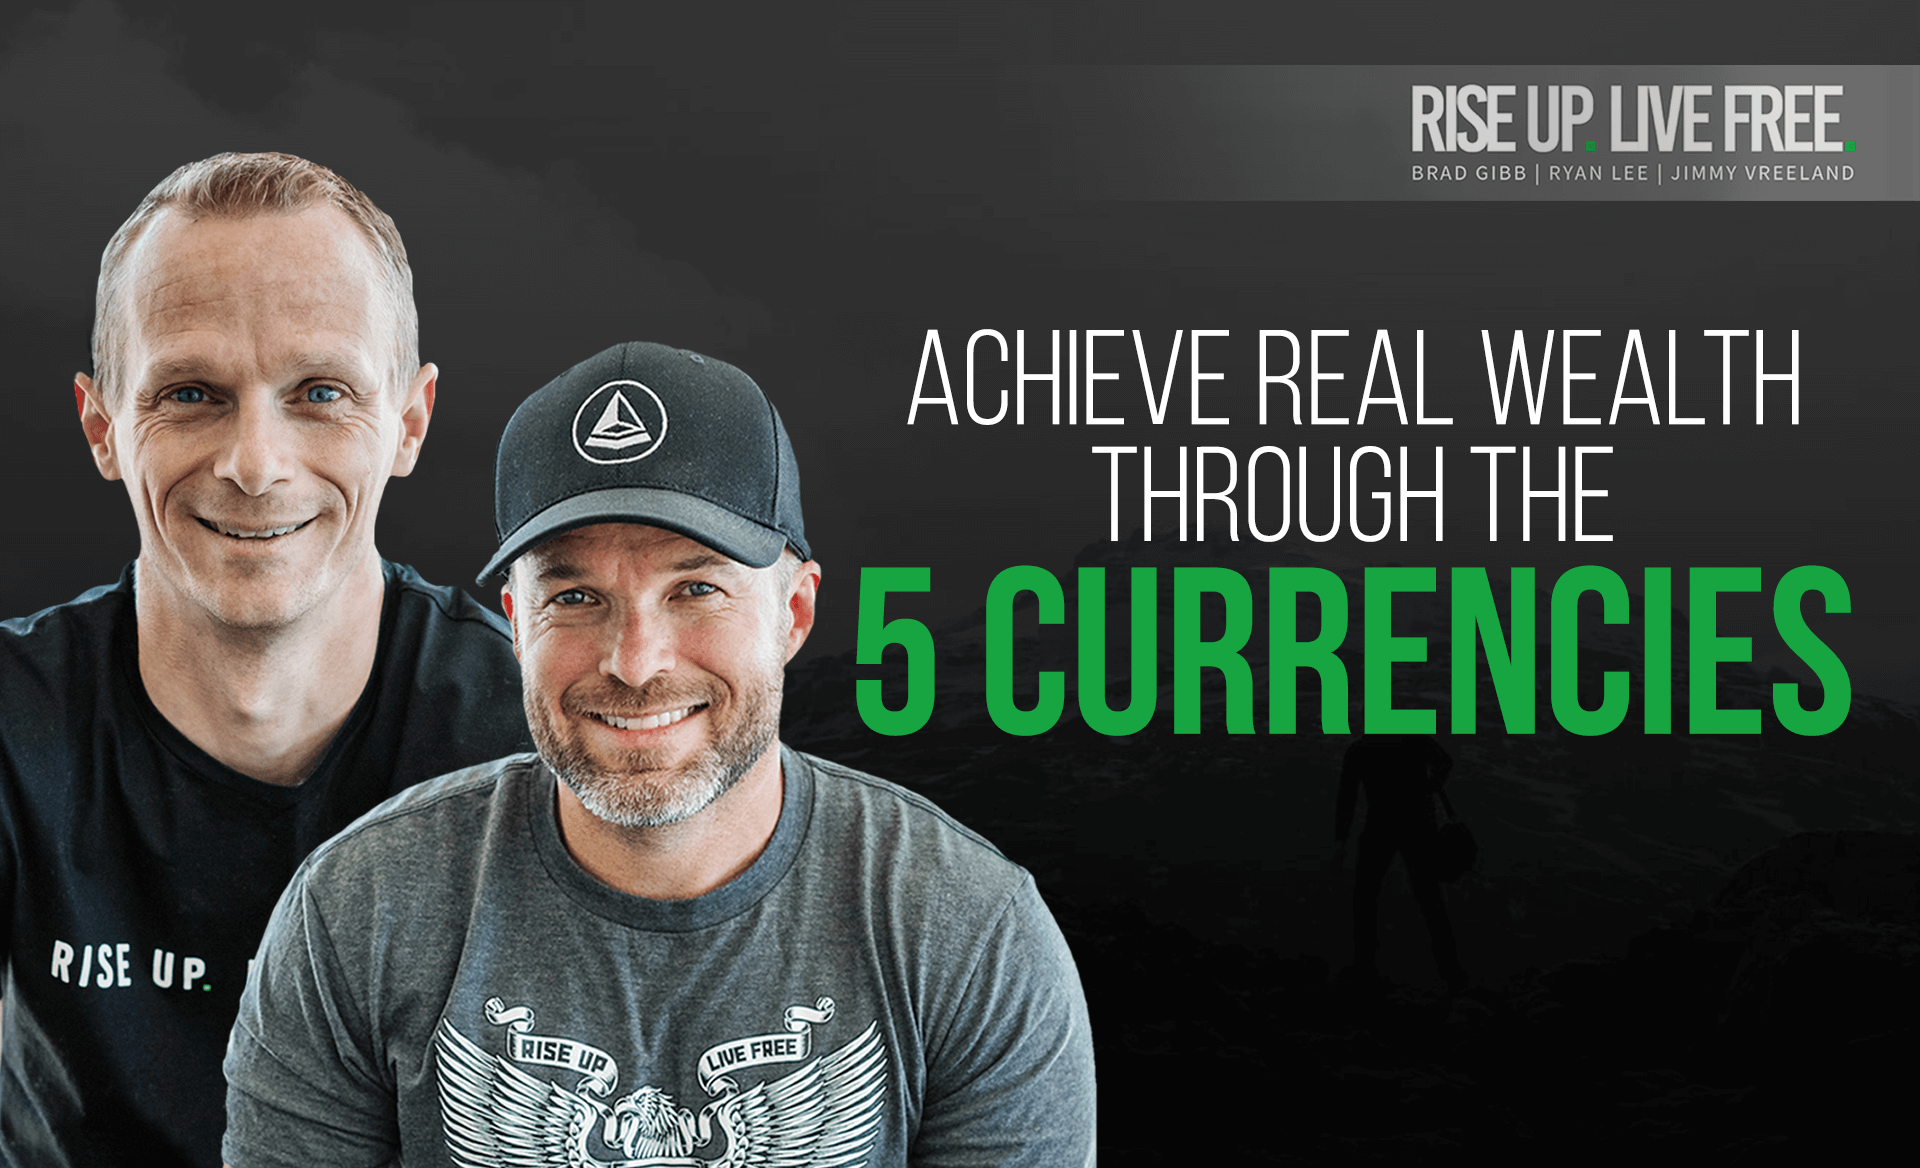 Achieve real wealth through the 5 currencies